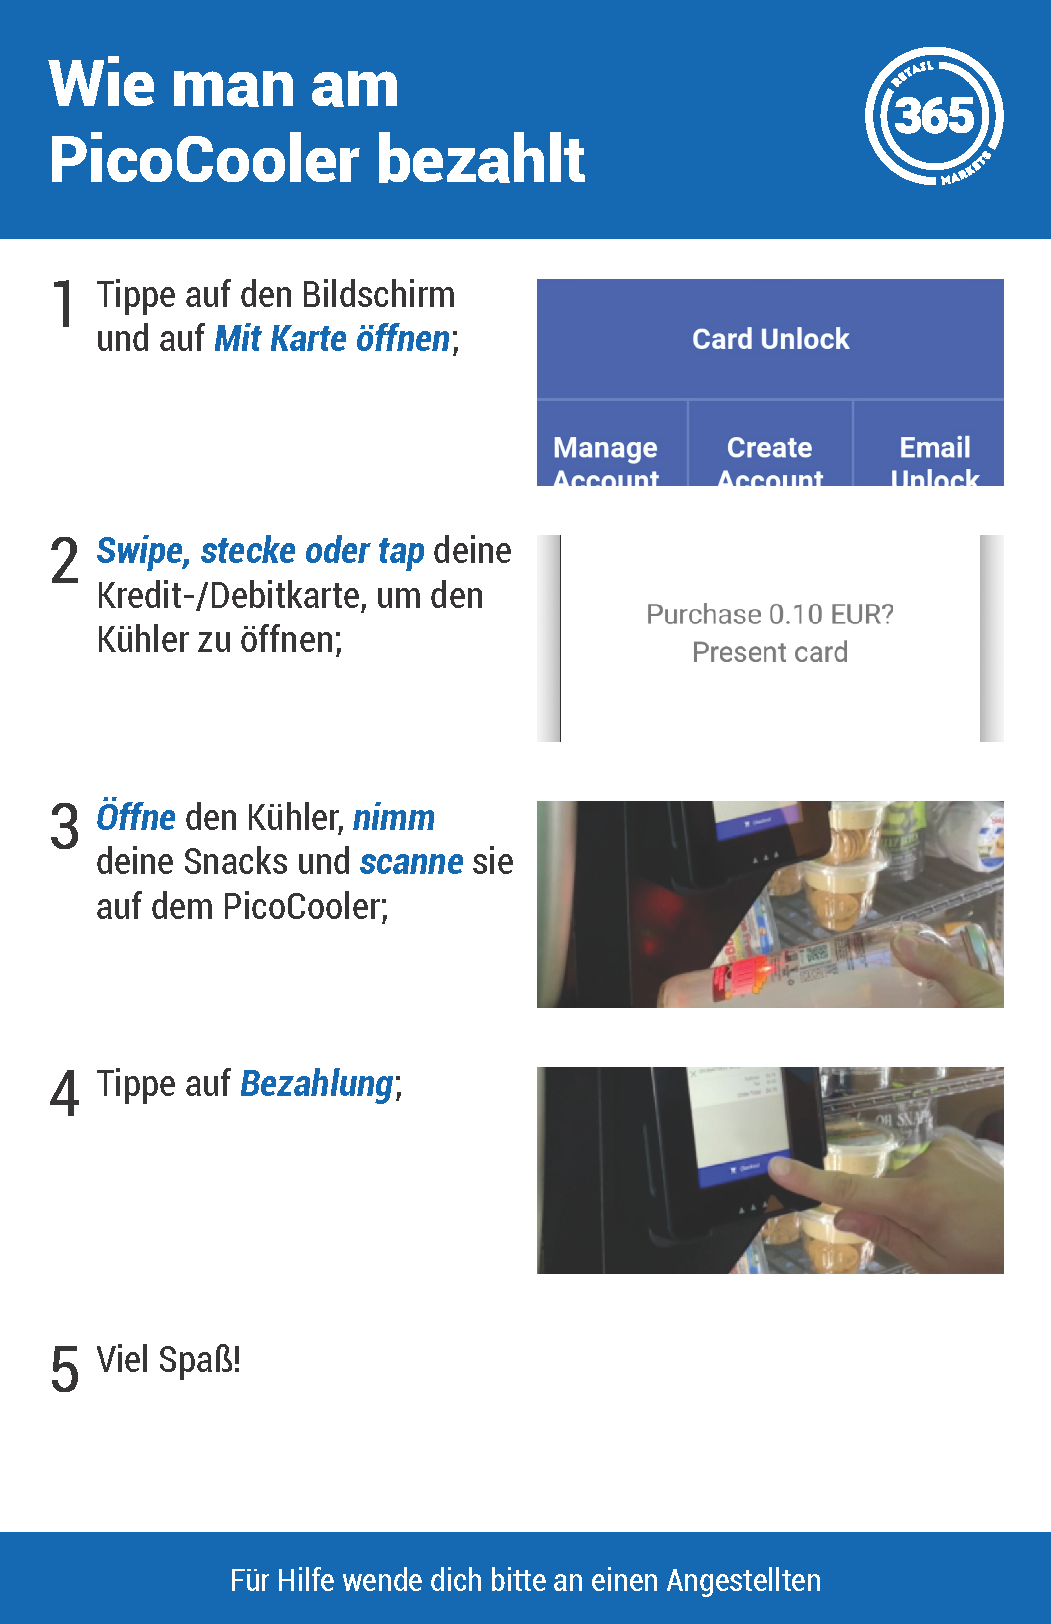 WingCards-PicoCooler-HowToCheckout-International-Locked-German.png